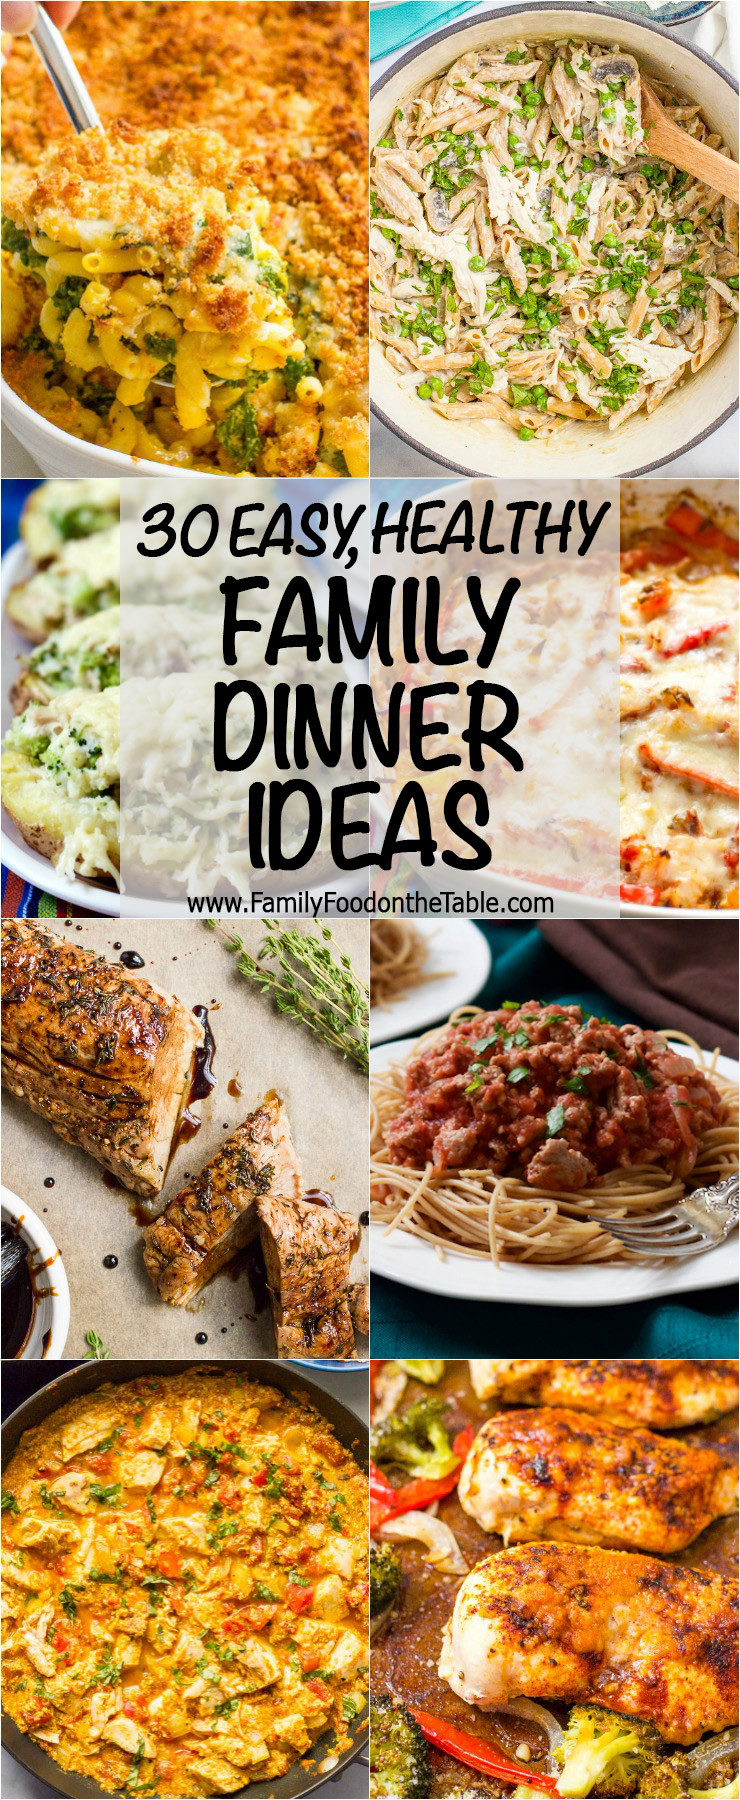 Quick Healthy Family Dinners
 30 easy healthy family dinner ideas Family Food on the Table